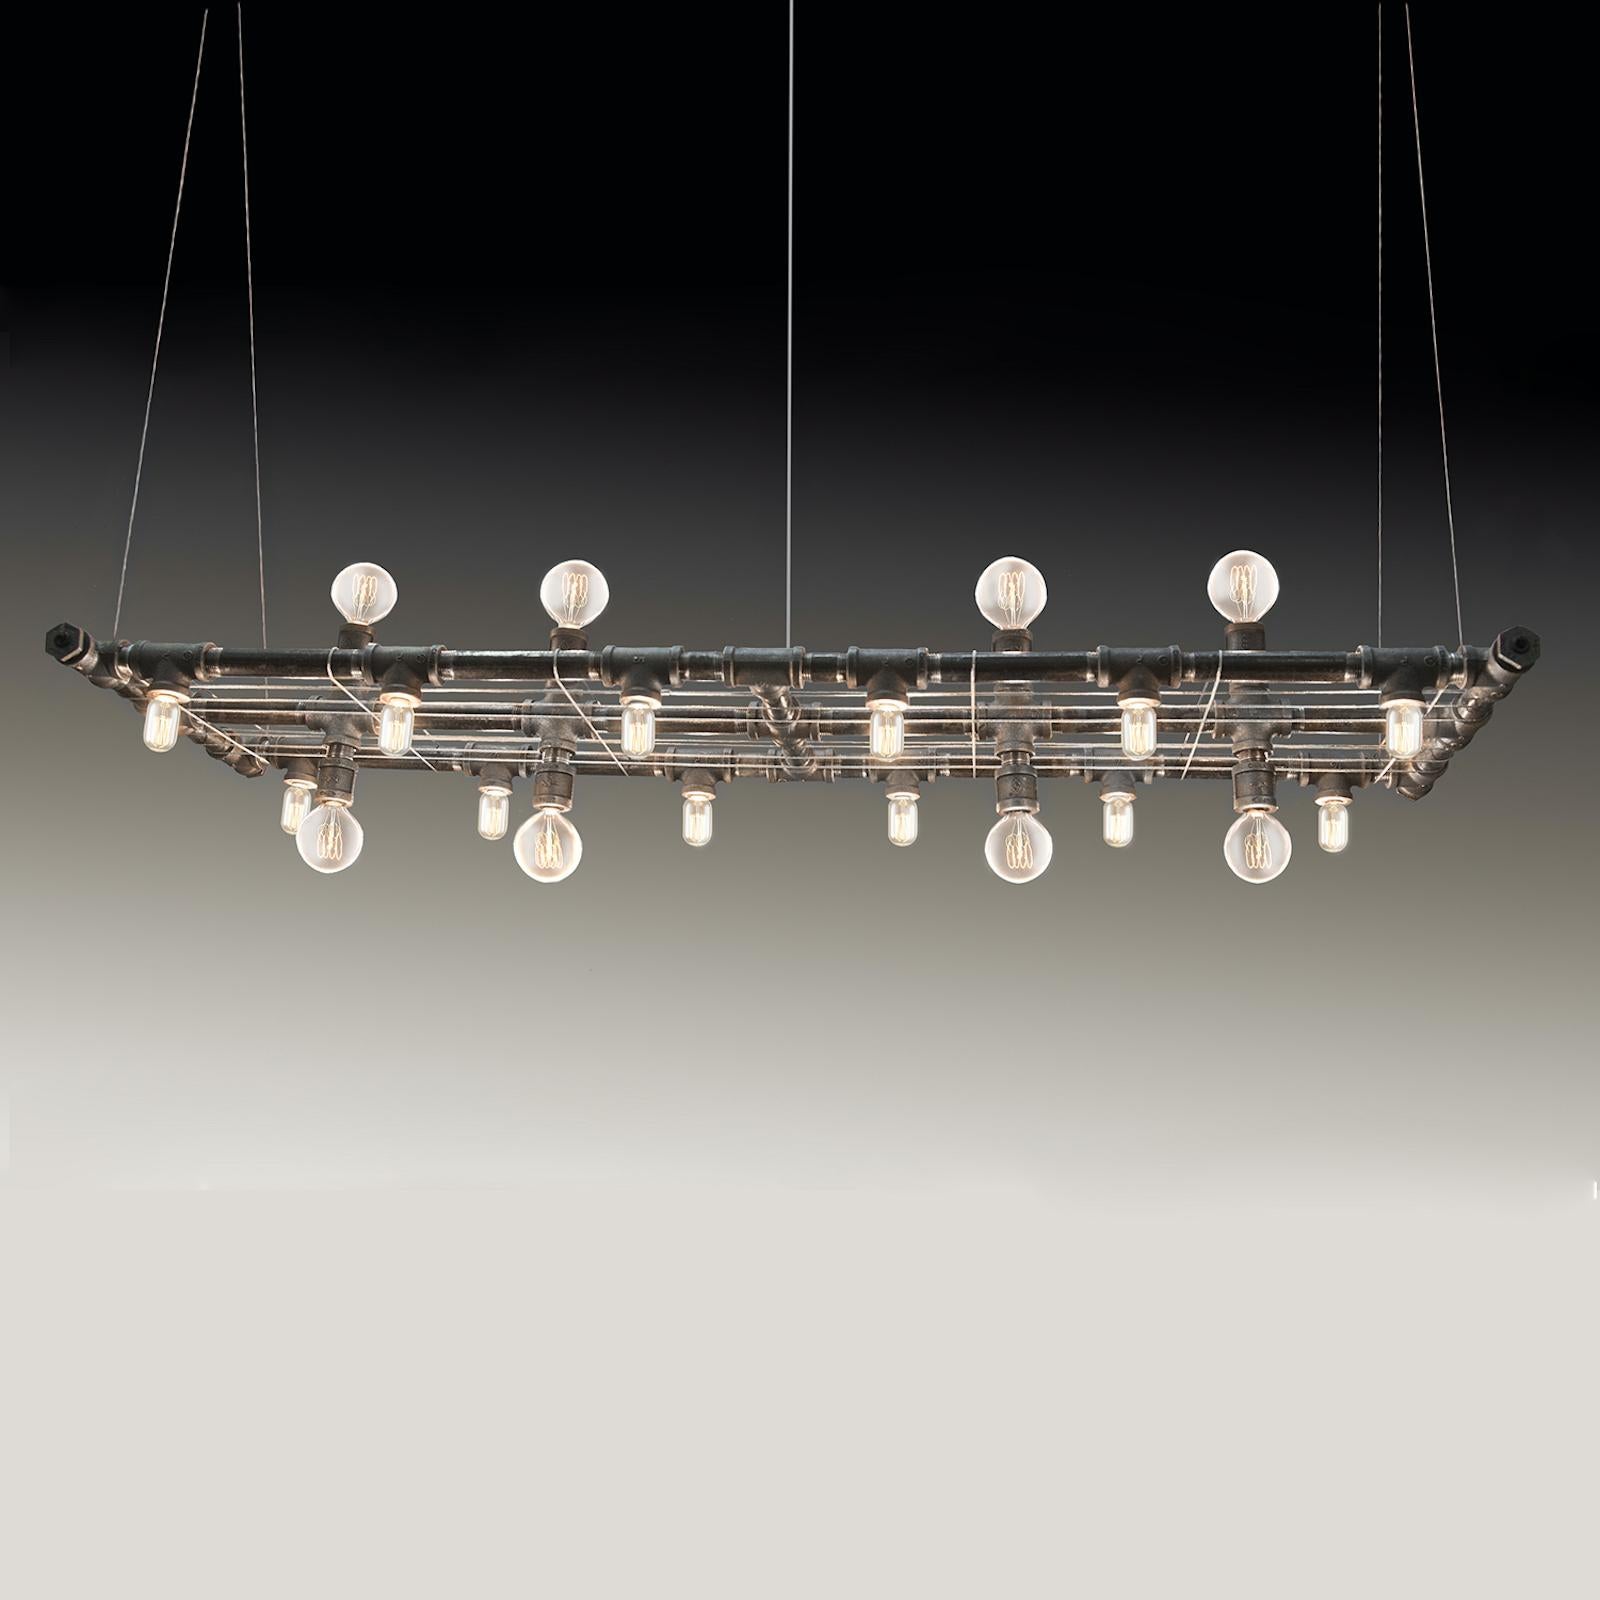 American Raw Banqueting Linear Suspension by Michael McHale For Sale